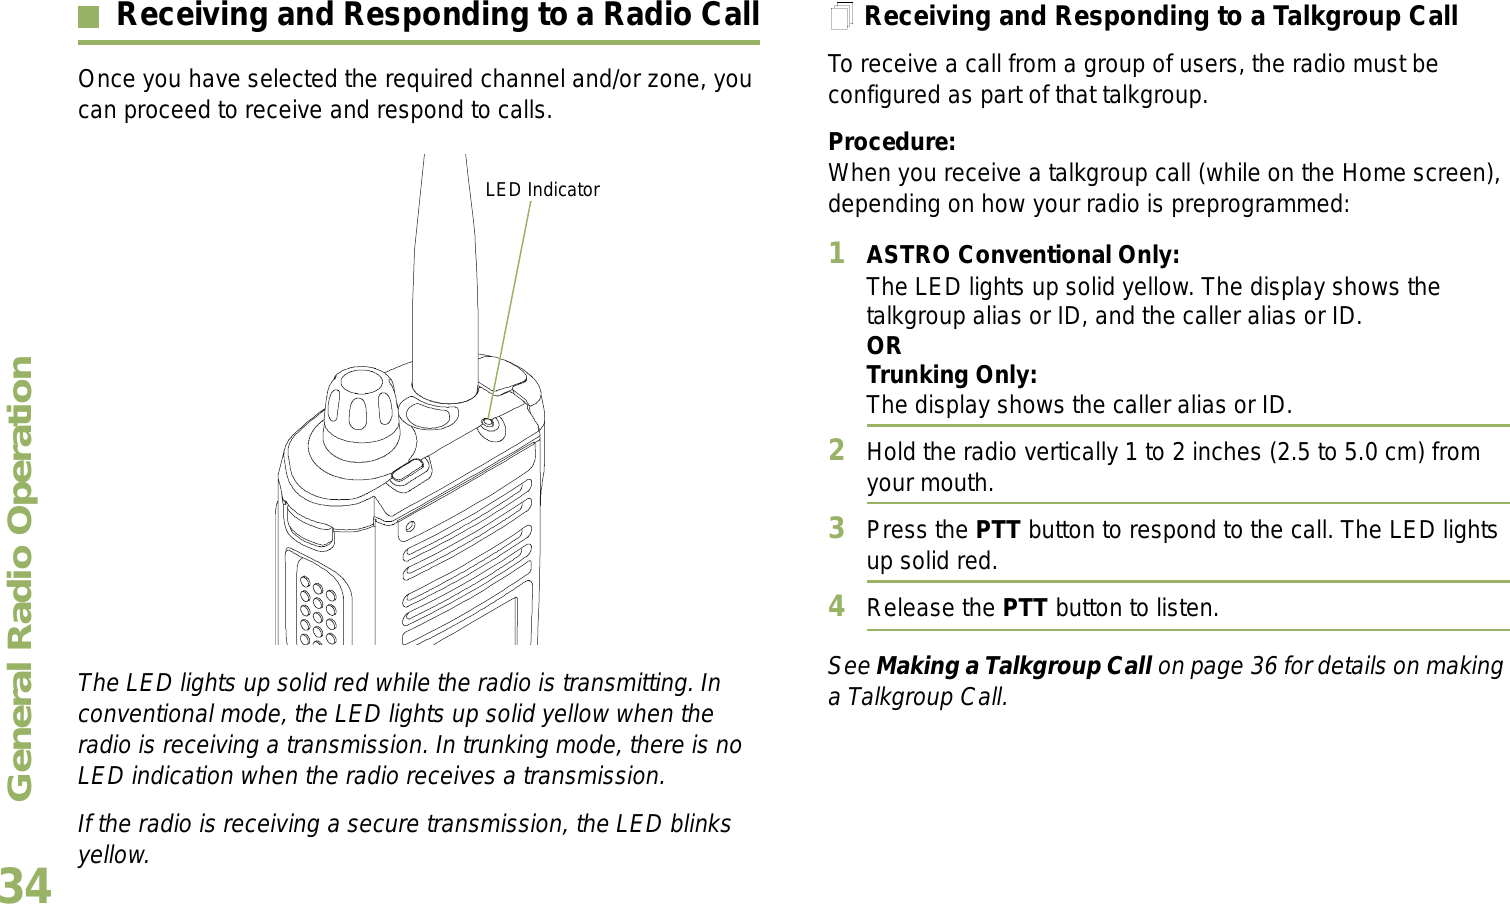 General Radio OperationEnglish34Receiving and Responding to a Radio CallOnce you have selected the required channel and/or zone, you can proceed to receive and respond to calls. The LED lights up solid red while the radio is transmitting. In conventional mode, the LED lights up solid yellow when the radio is receiving a transmission. In trunking mode, there is no LED indication when the radio receives a transmission.If the radio is receiving a secure transmission, the LED blinks yellow.Receiving and Responding to a Talkgroup CallTo receive a call from a group of users, the radio must be configured as part of that talkgroup.Procedure:When you receive a talkgroup call (while on the Home screen), depending on how your radio is preprogrammed:1ASTRO Conventional Only:The LED lights up solid yellow. The display shows the talkgroup alias or ID, and the caller alias or ID.ORTrunking Only:The display shows the caller alias or ID.2Hold the radio vertically 1 to 2 inches (2.5 to 5.0 cm) from your mouth. 3Press the PTT button to respond to the call. The LED lights up solid red. 4Release the PTT button to listen.See Making a Talkgroup Call on page 36 for details on making a Talkgroup Call.LED Indicator